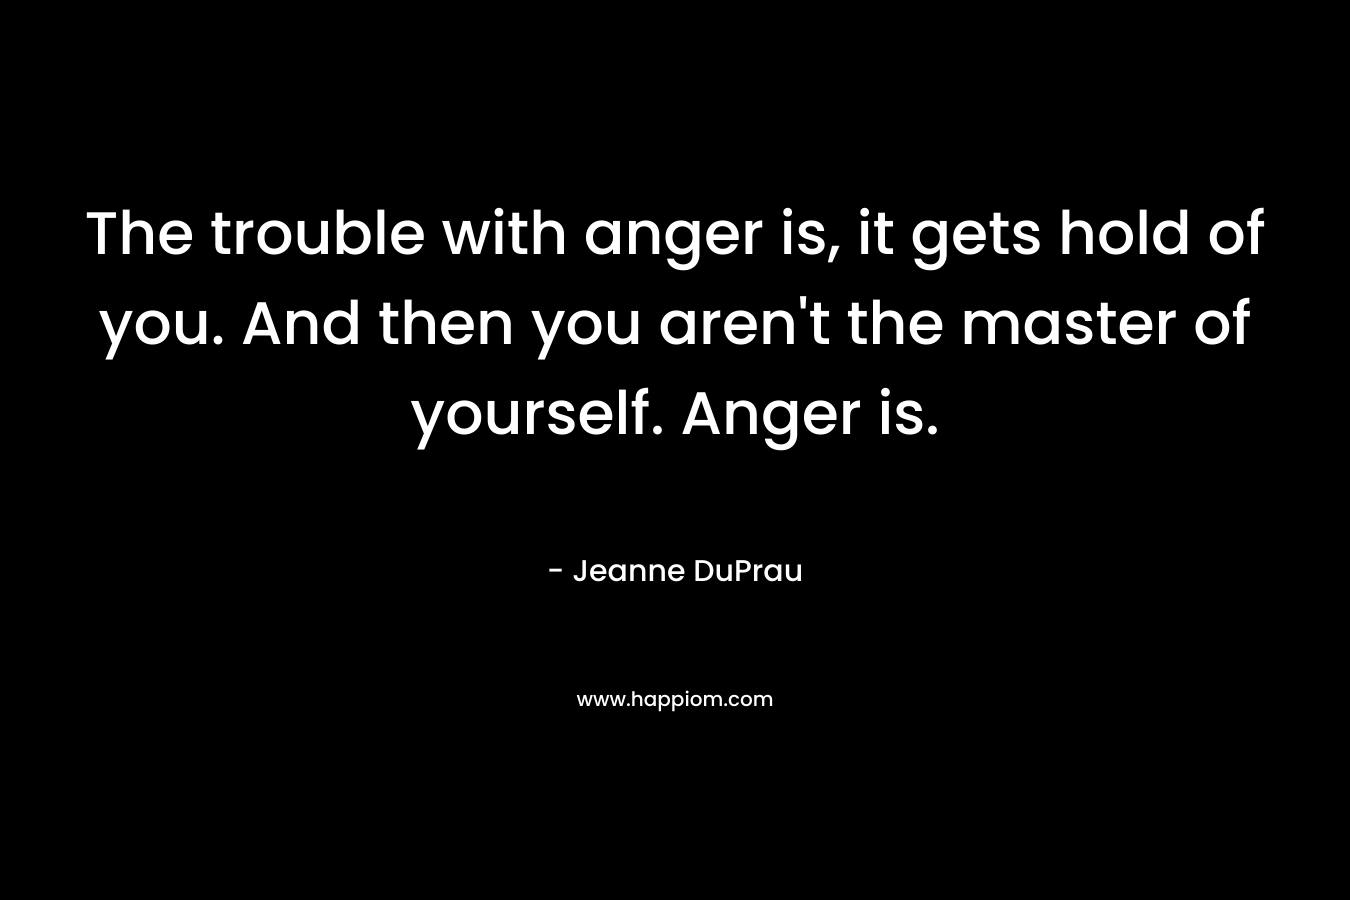 The trouble with anger is, it gets hold of you. And then you aren’t the master of yourself. Anger is. – Jeanne DuPrau